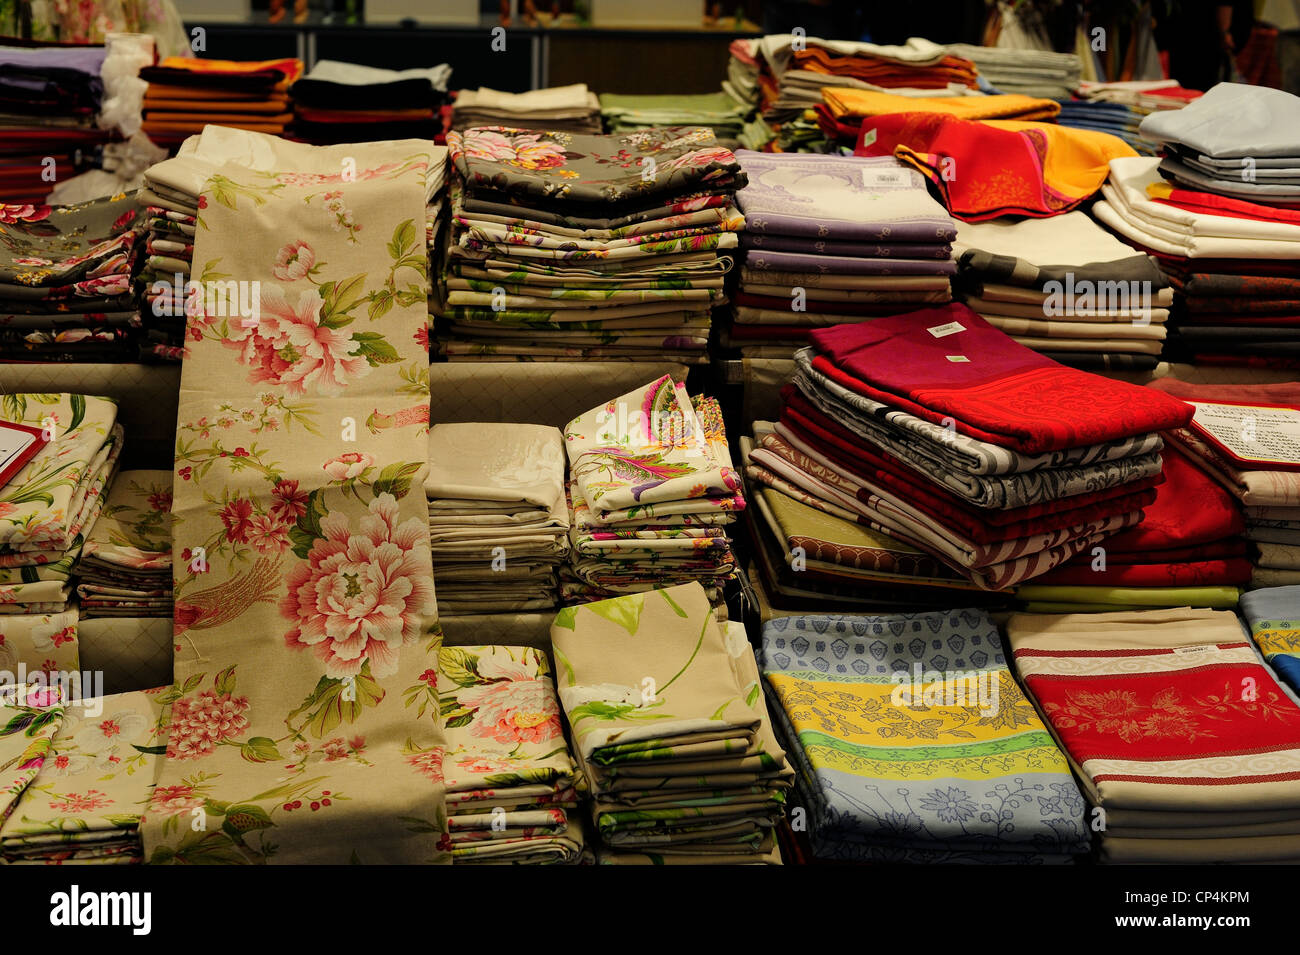 Provencal traditional cloths at a French market Stock Photo